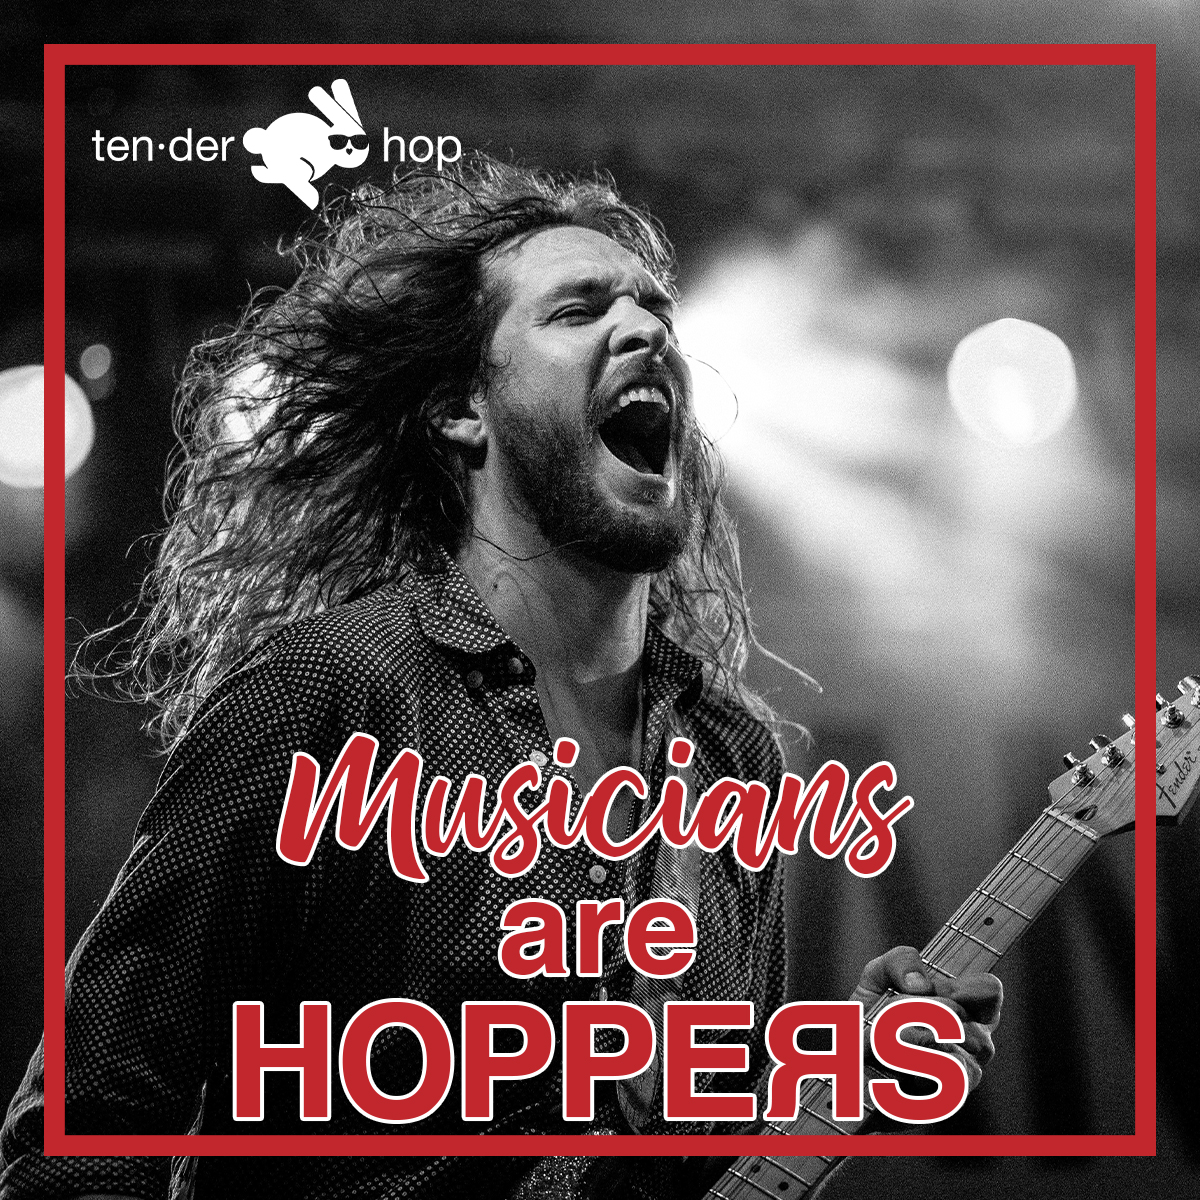 Musicians are HOPPERS